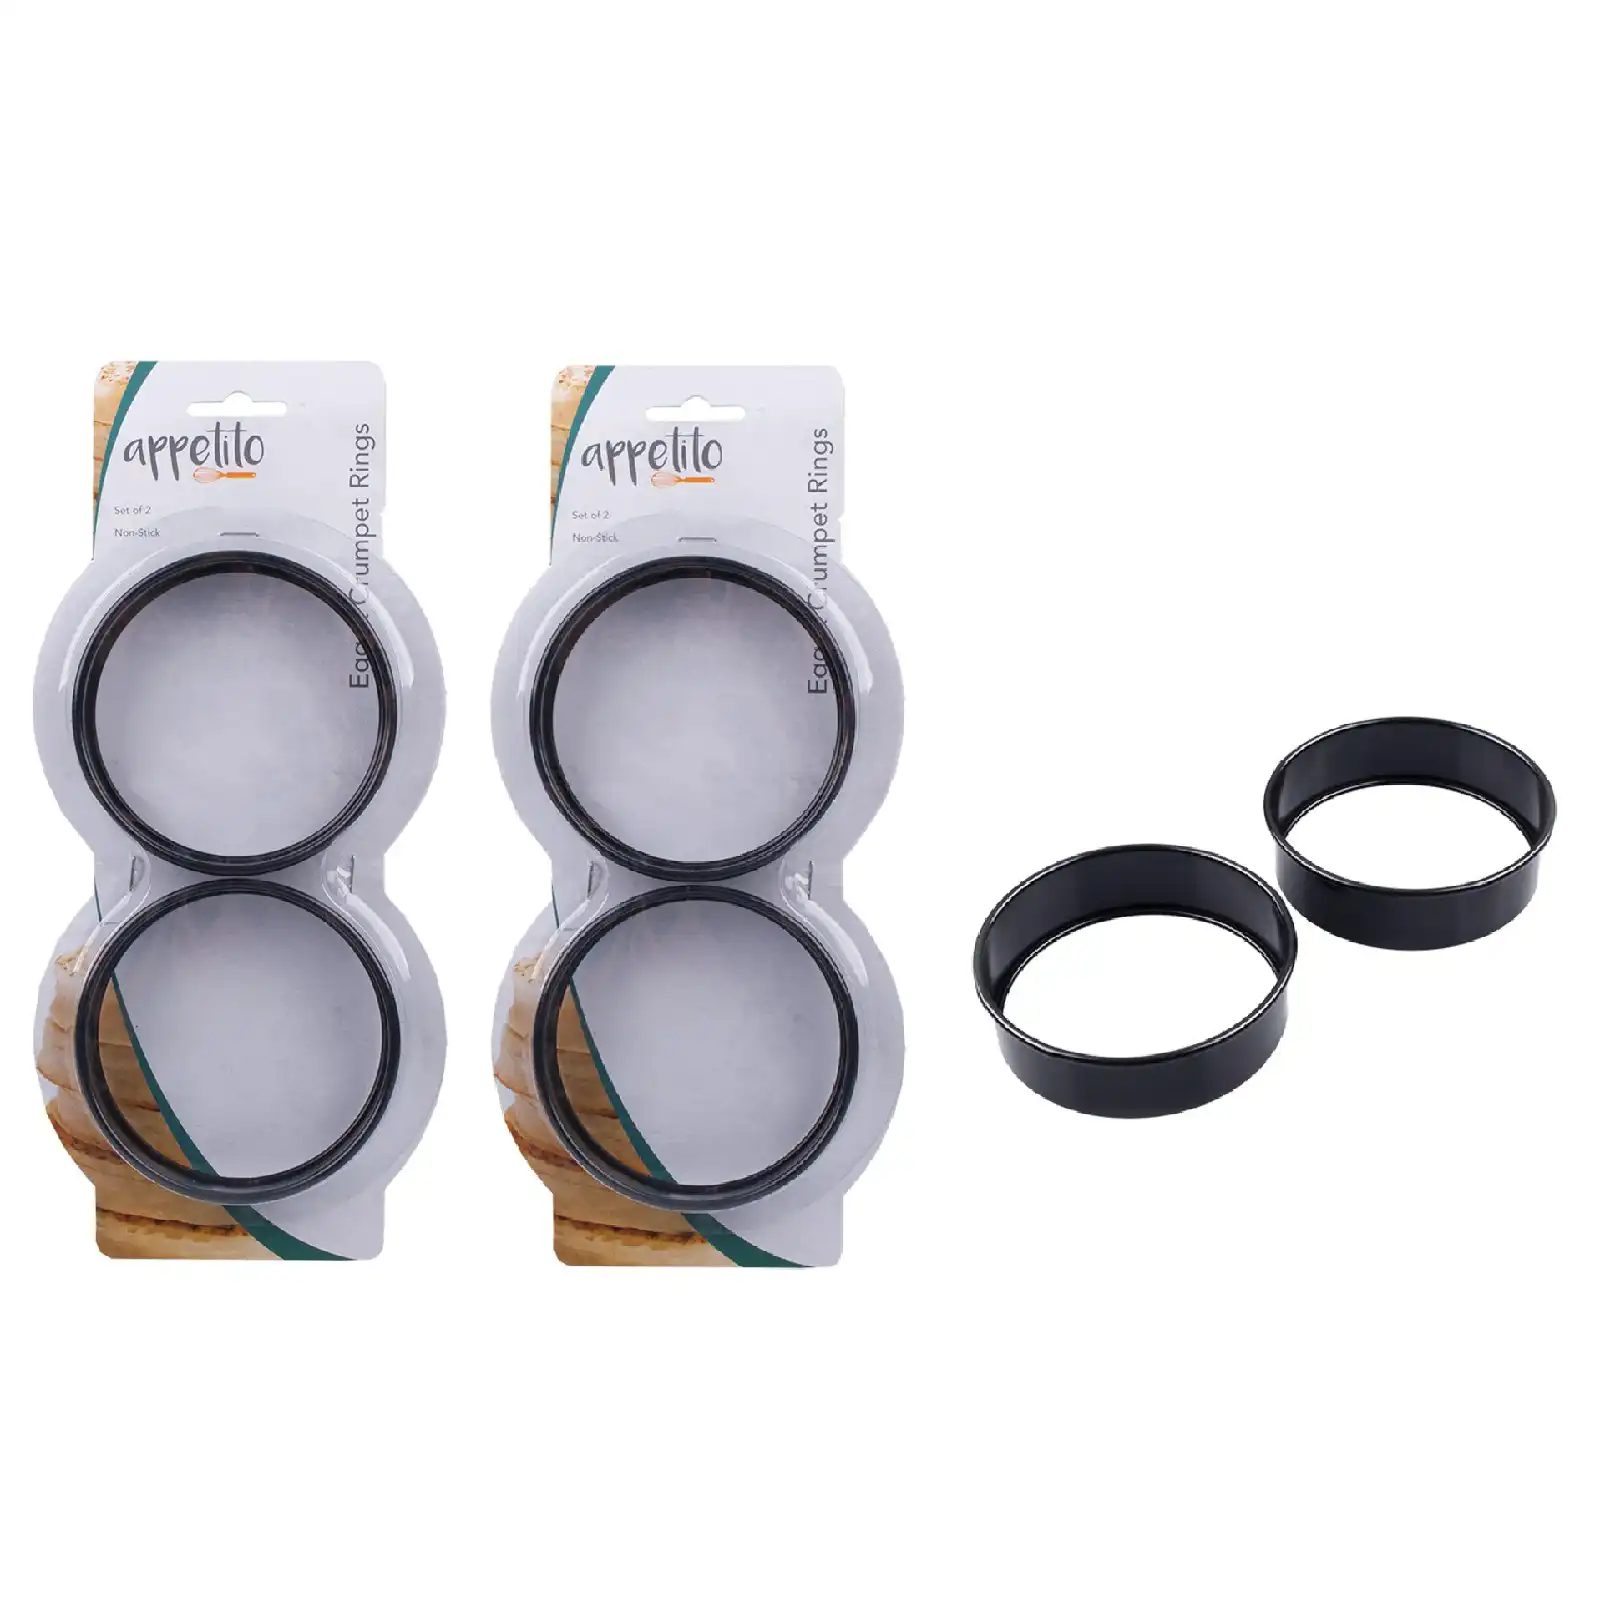 Appetito NON-STICK EGG/CRUMPET RINGS - SET of 4